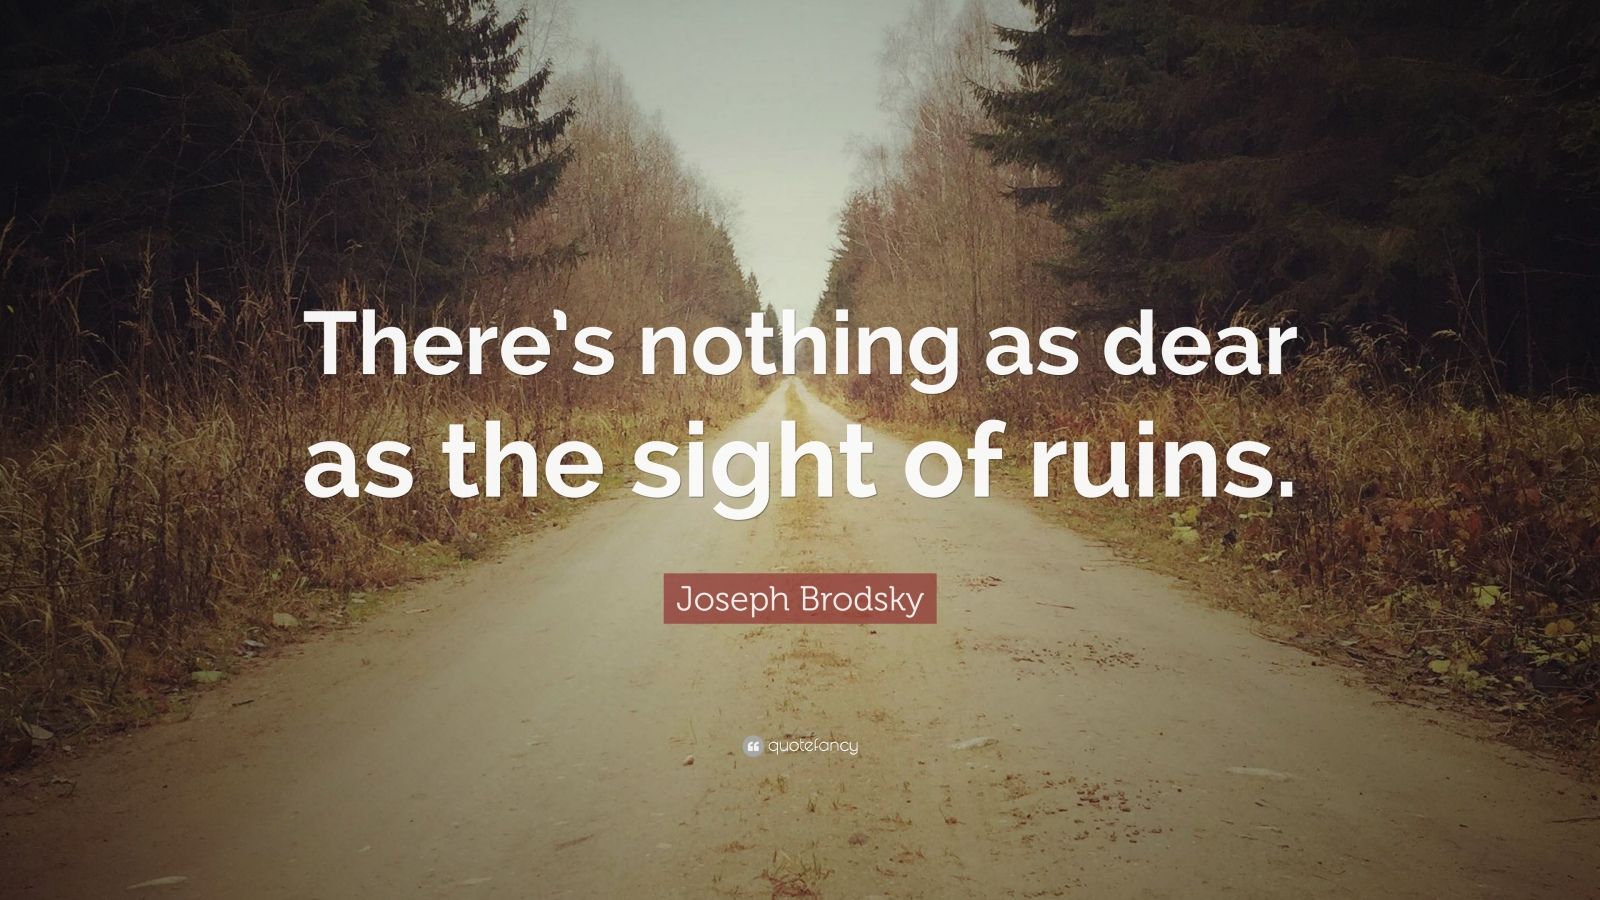 Joseph Brodsky Quote: “There’s nothing as dear as the sight of ruins ...